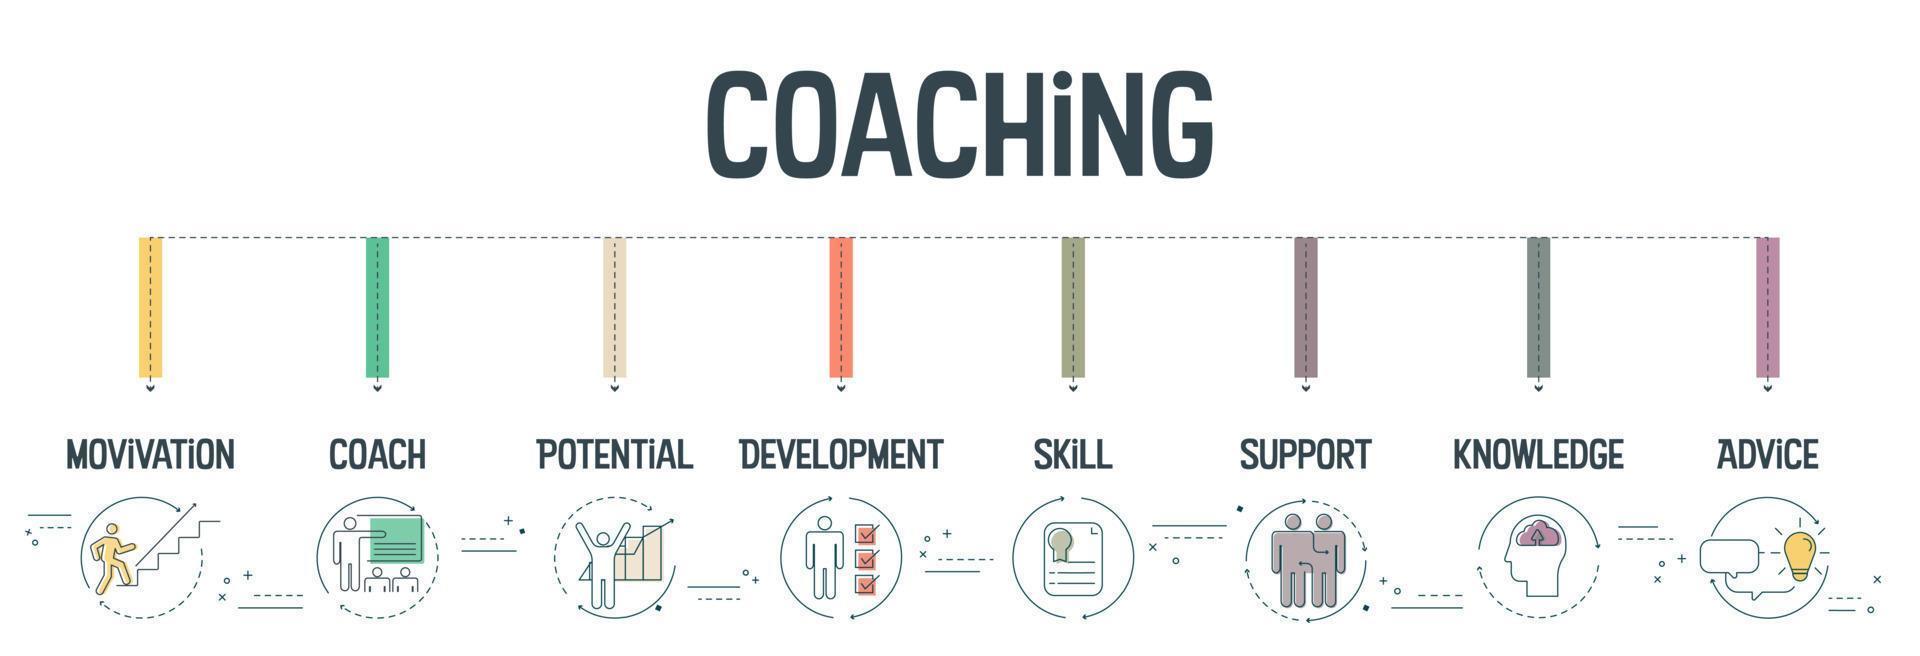 Coaching banner concept has 8 steps to analyze such as motivation, coach, potential, development, skill, support, knowledge and advice.Business infographic for slide presentaion or web banner. Vector. vector